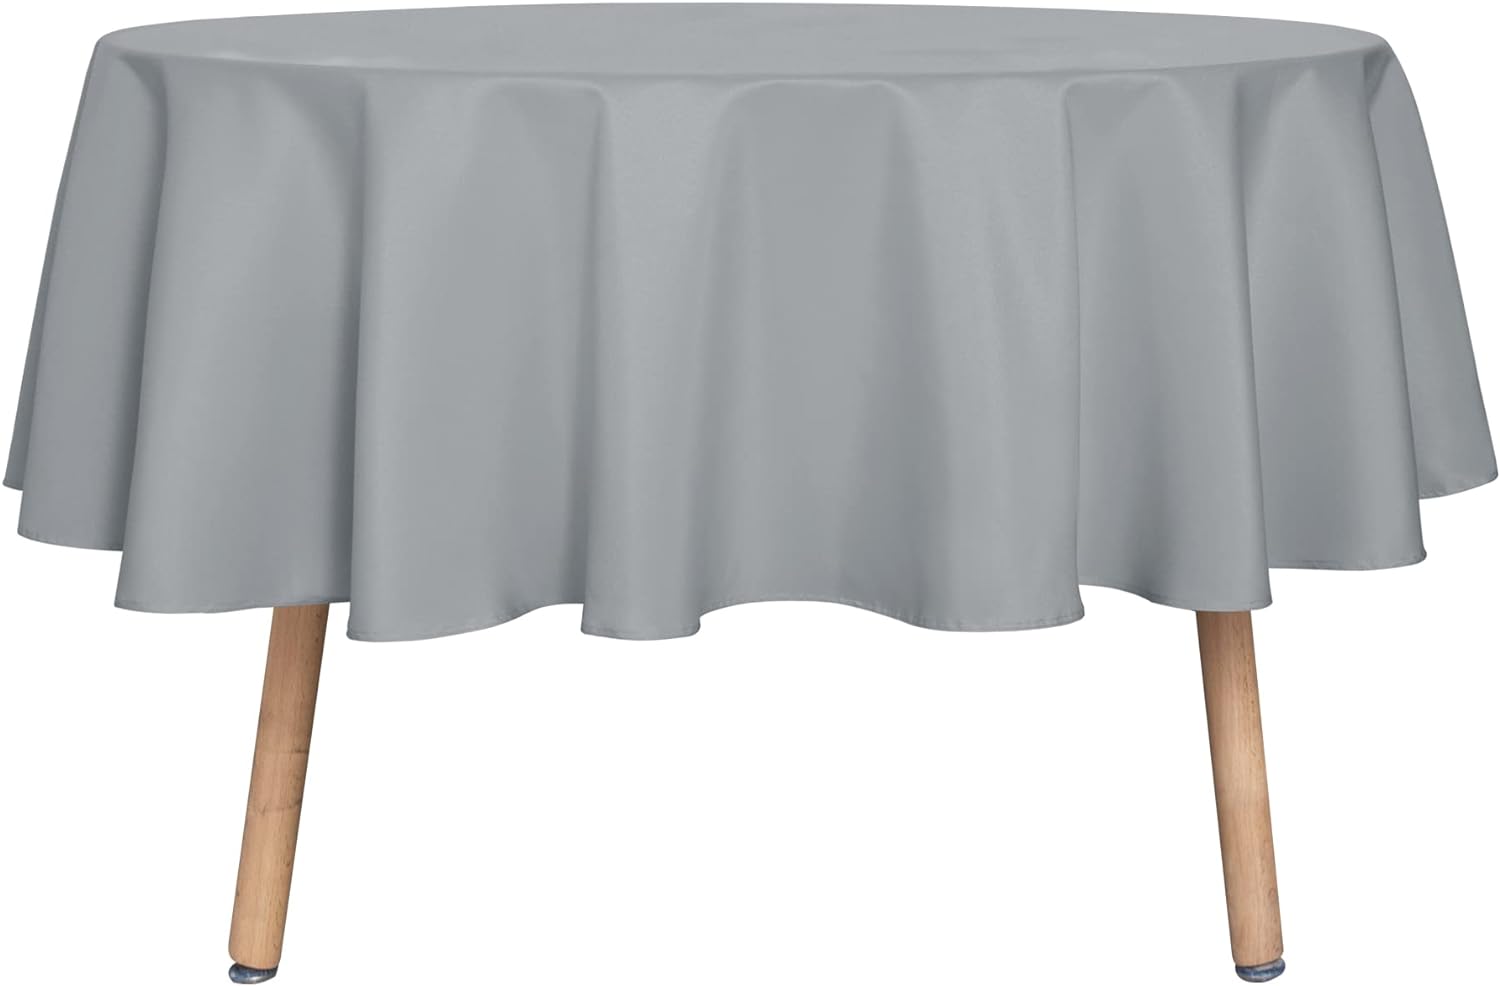 sancua Round Tablecloth - 60 Inch - Water Resistant Spill Proof Washable Polyester Table Cloth Decorative Fabric Table Cover for Dining Table, Buffet Parties and Camping, Silver Grey